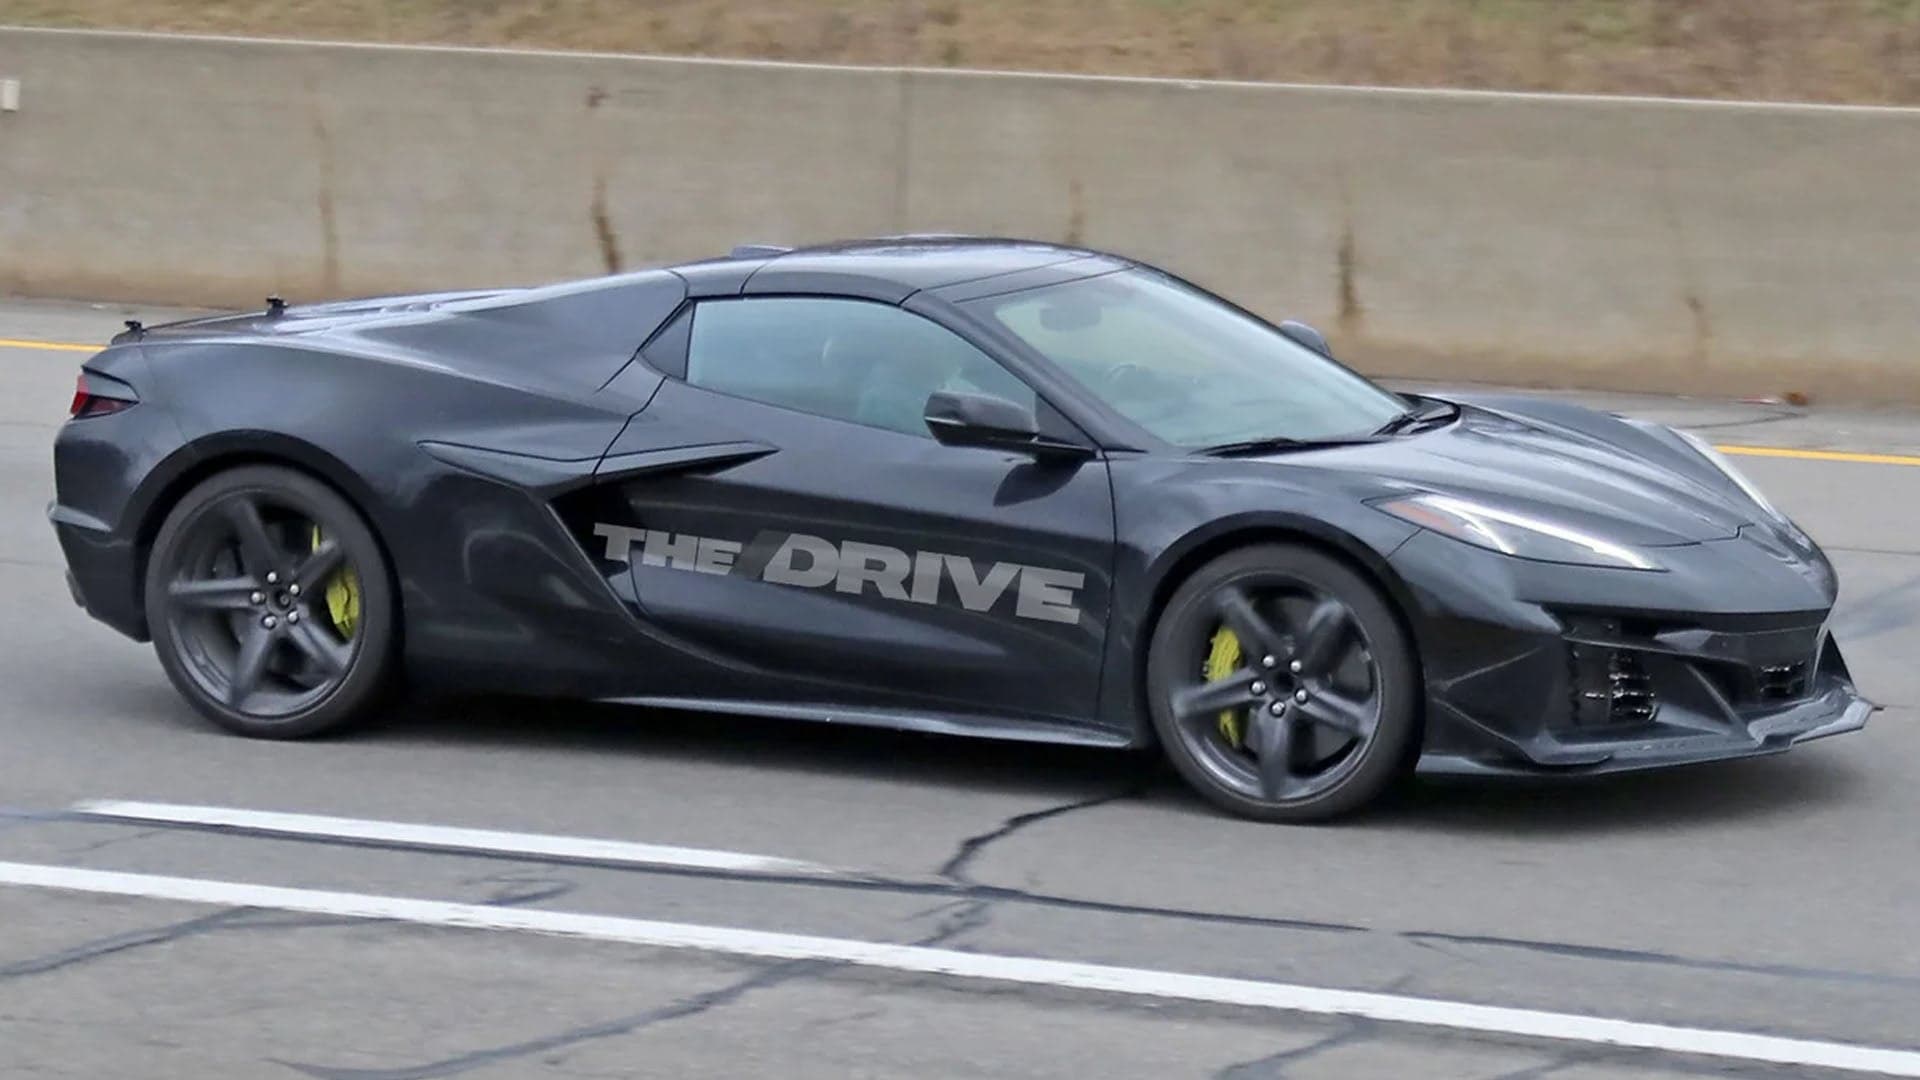 Chevy Corvette Hybrid’s Wild Dual-Clutch Transmission Likely Revealed in Detailed Patent